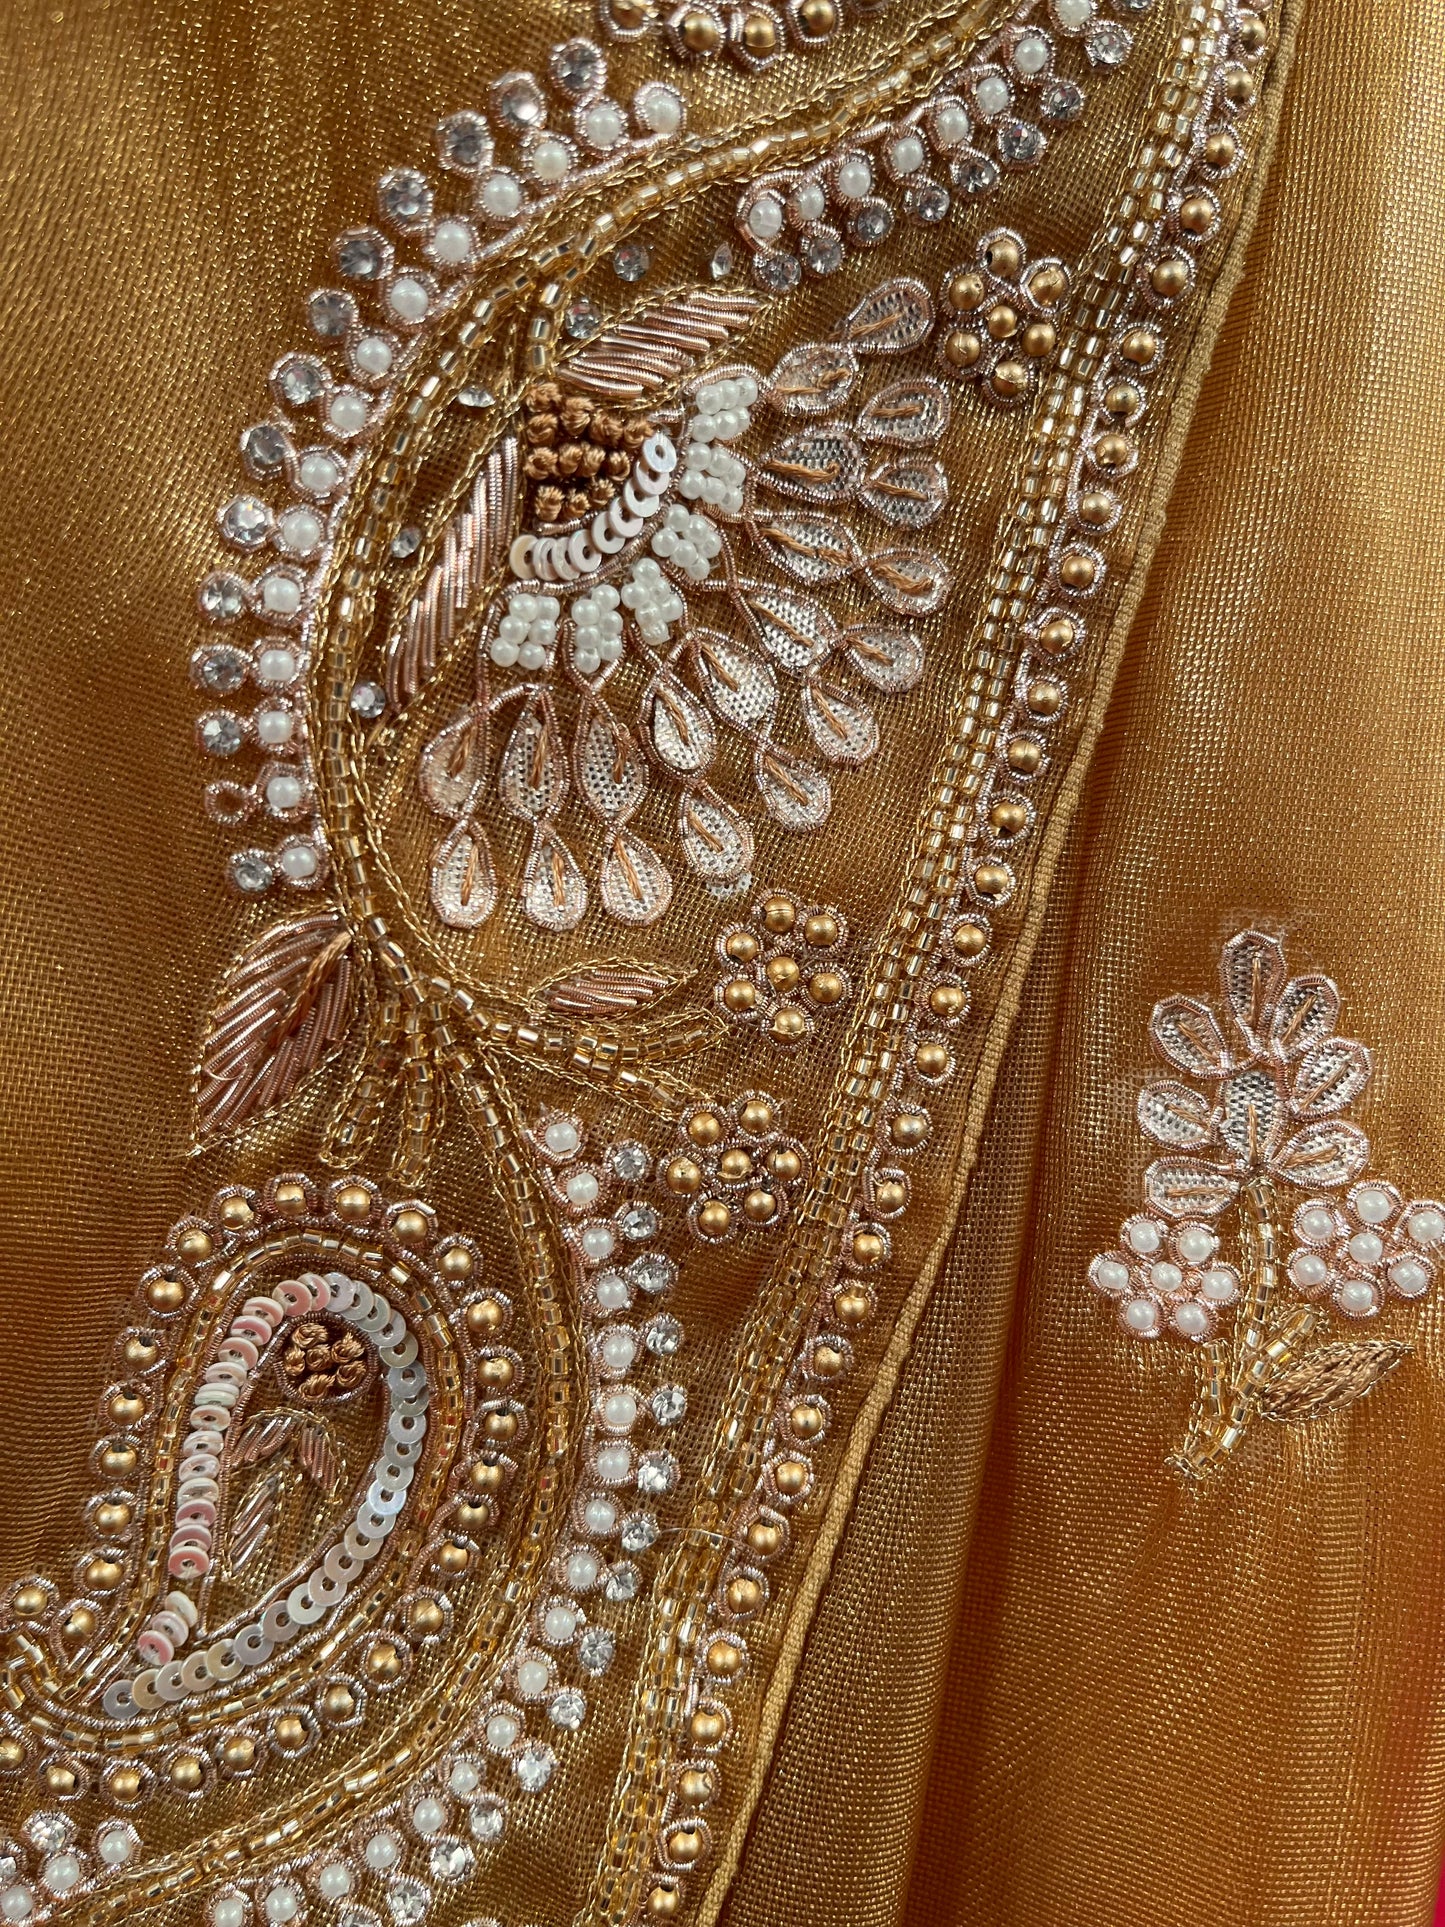 GOLDEN COLOUR ORGANZA TISSUE EMBROIDERED SAREE EMBELLISHED WITH CUTDANA, SEQUINS & GOTA PATTI WORK